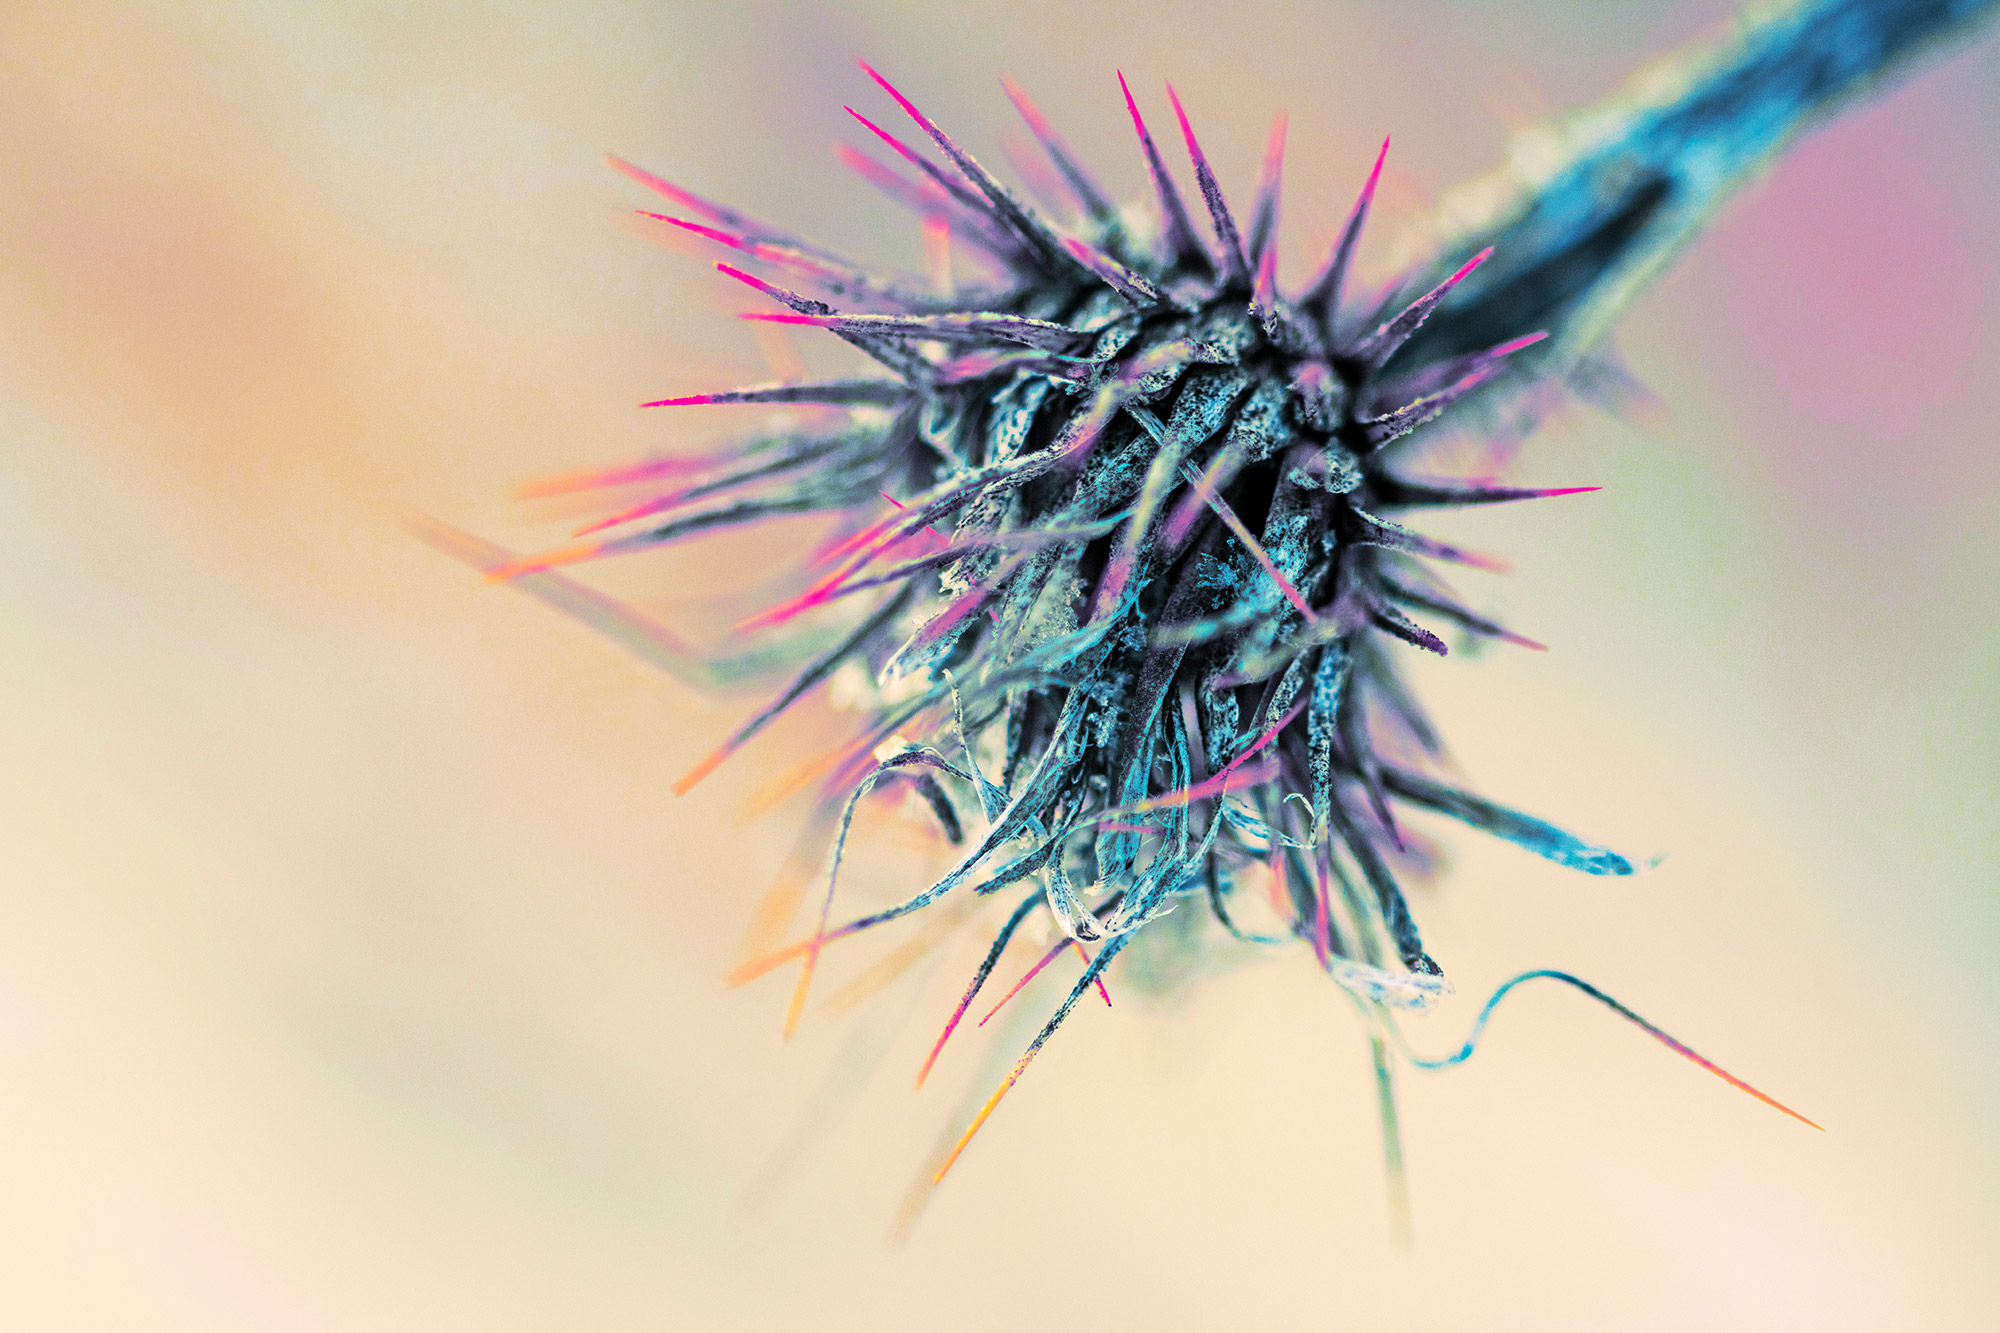 Dead Frigid Spiky Salsify Flower Withering Among Cold (Color Photo)